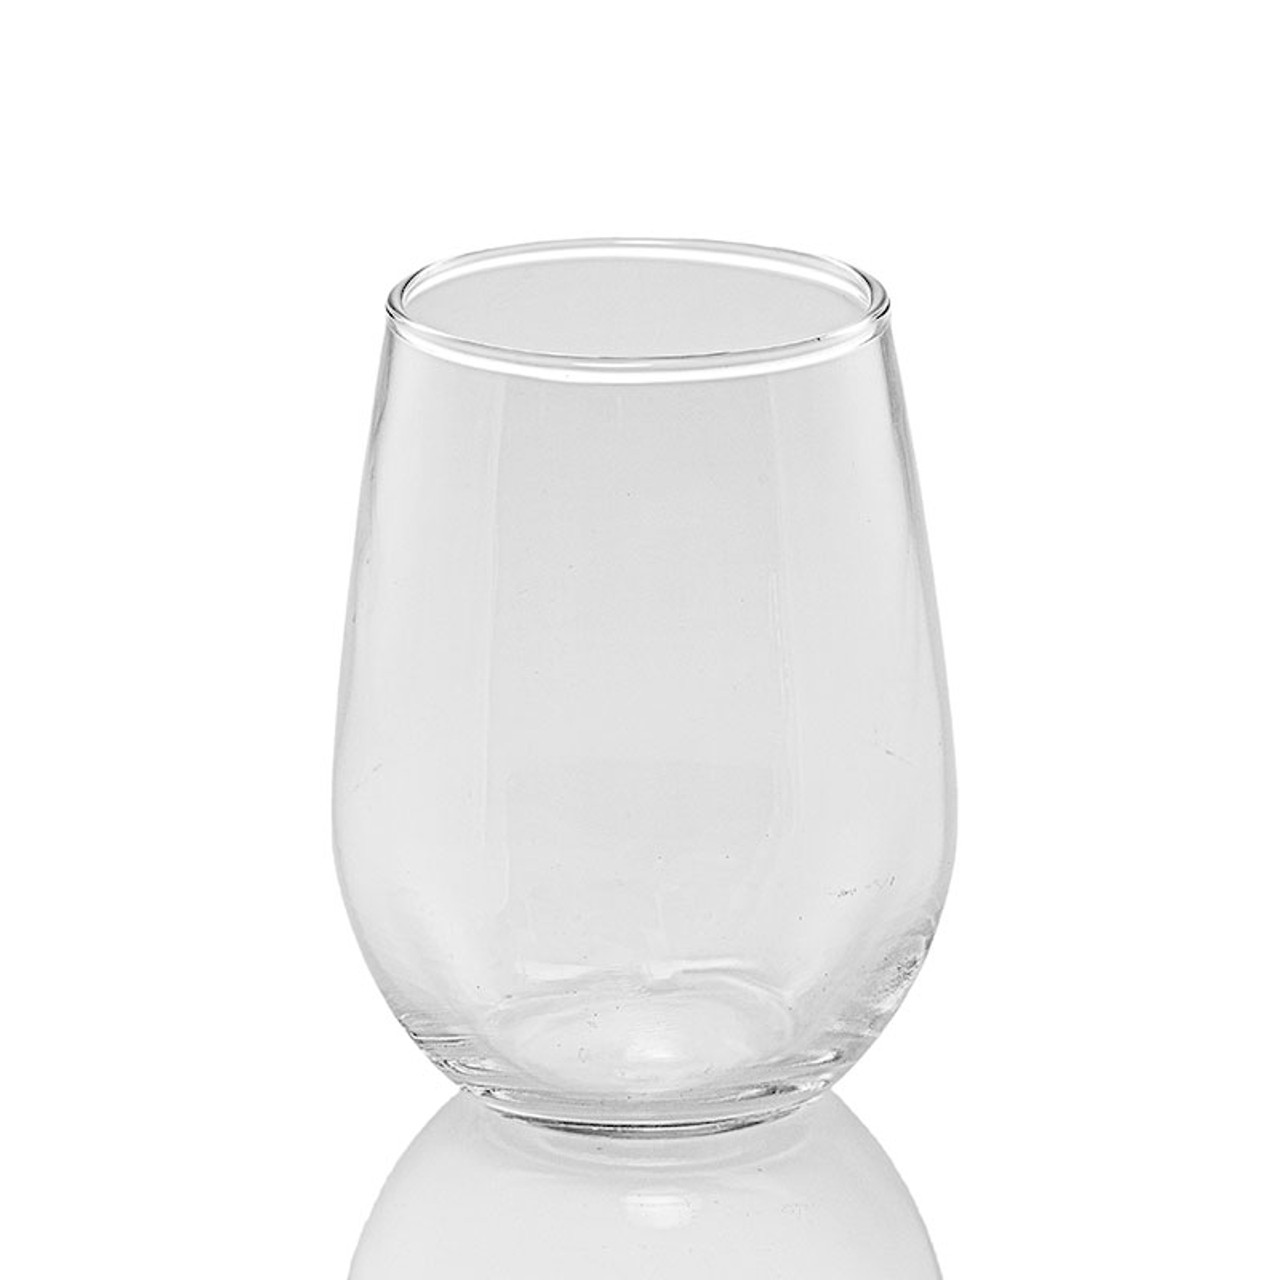 Cylinder Wine Glasses - Set of Two